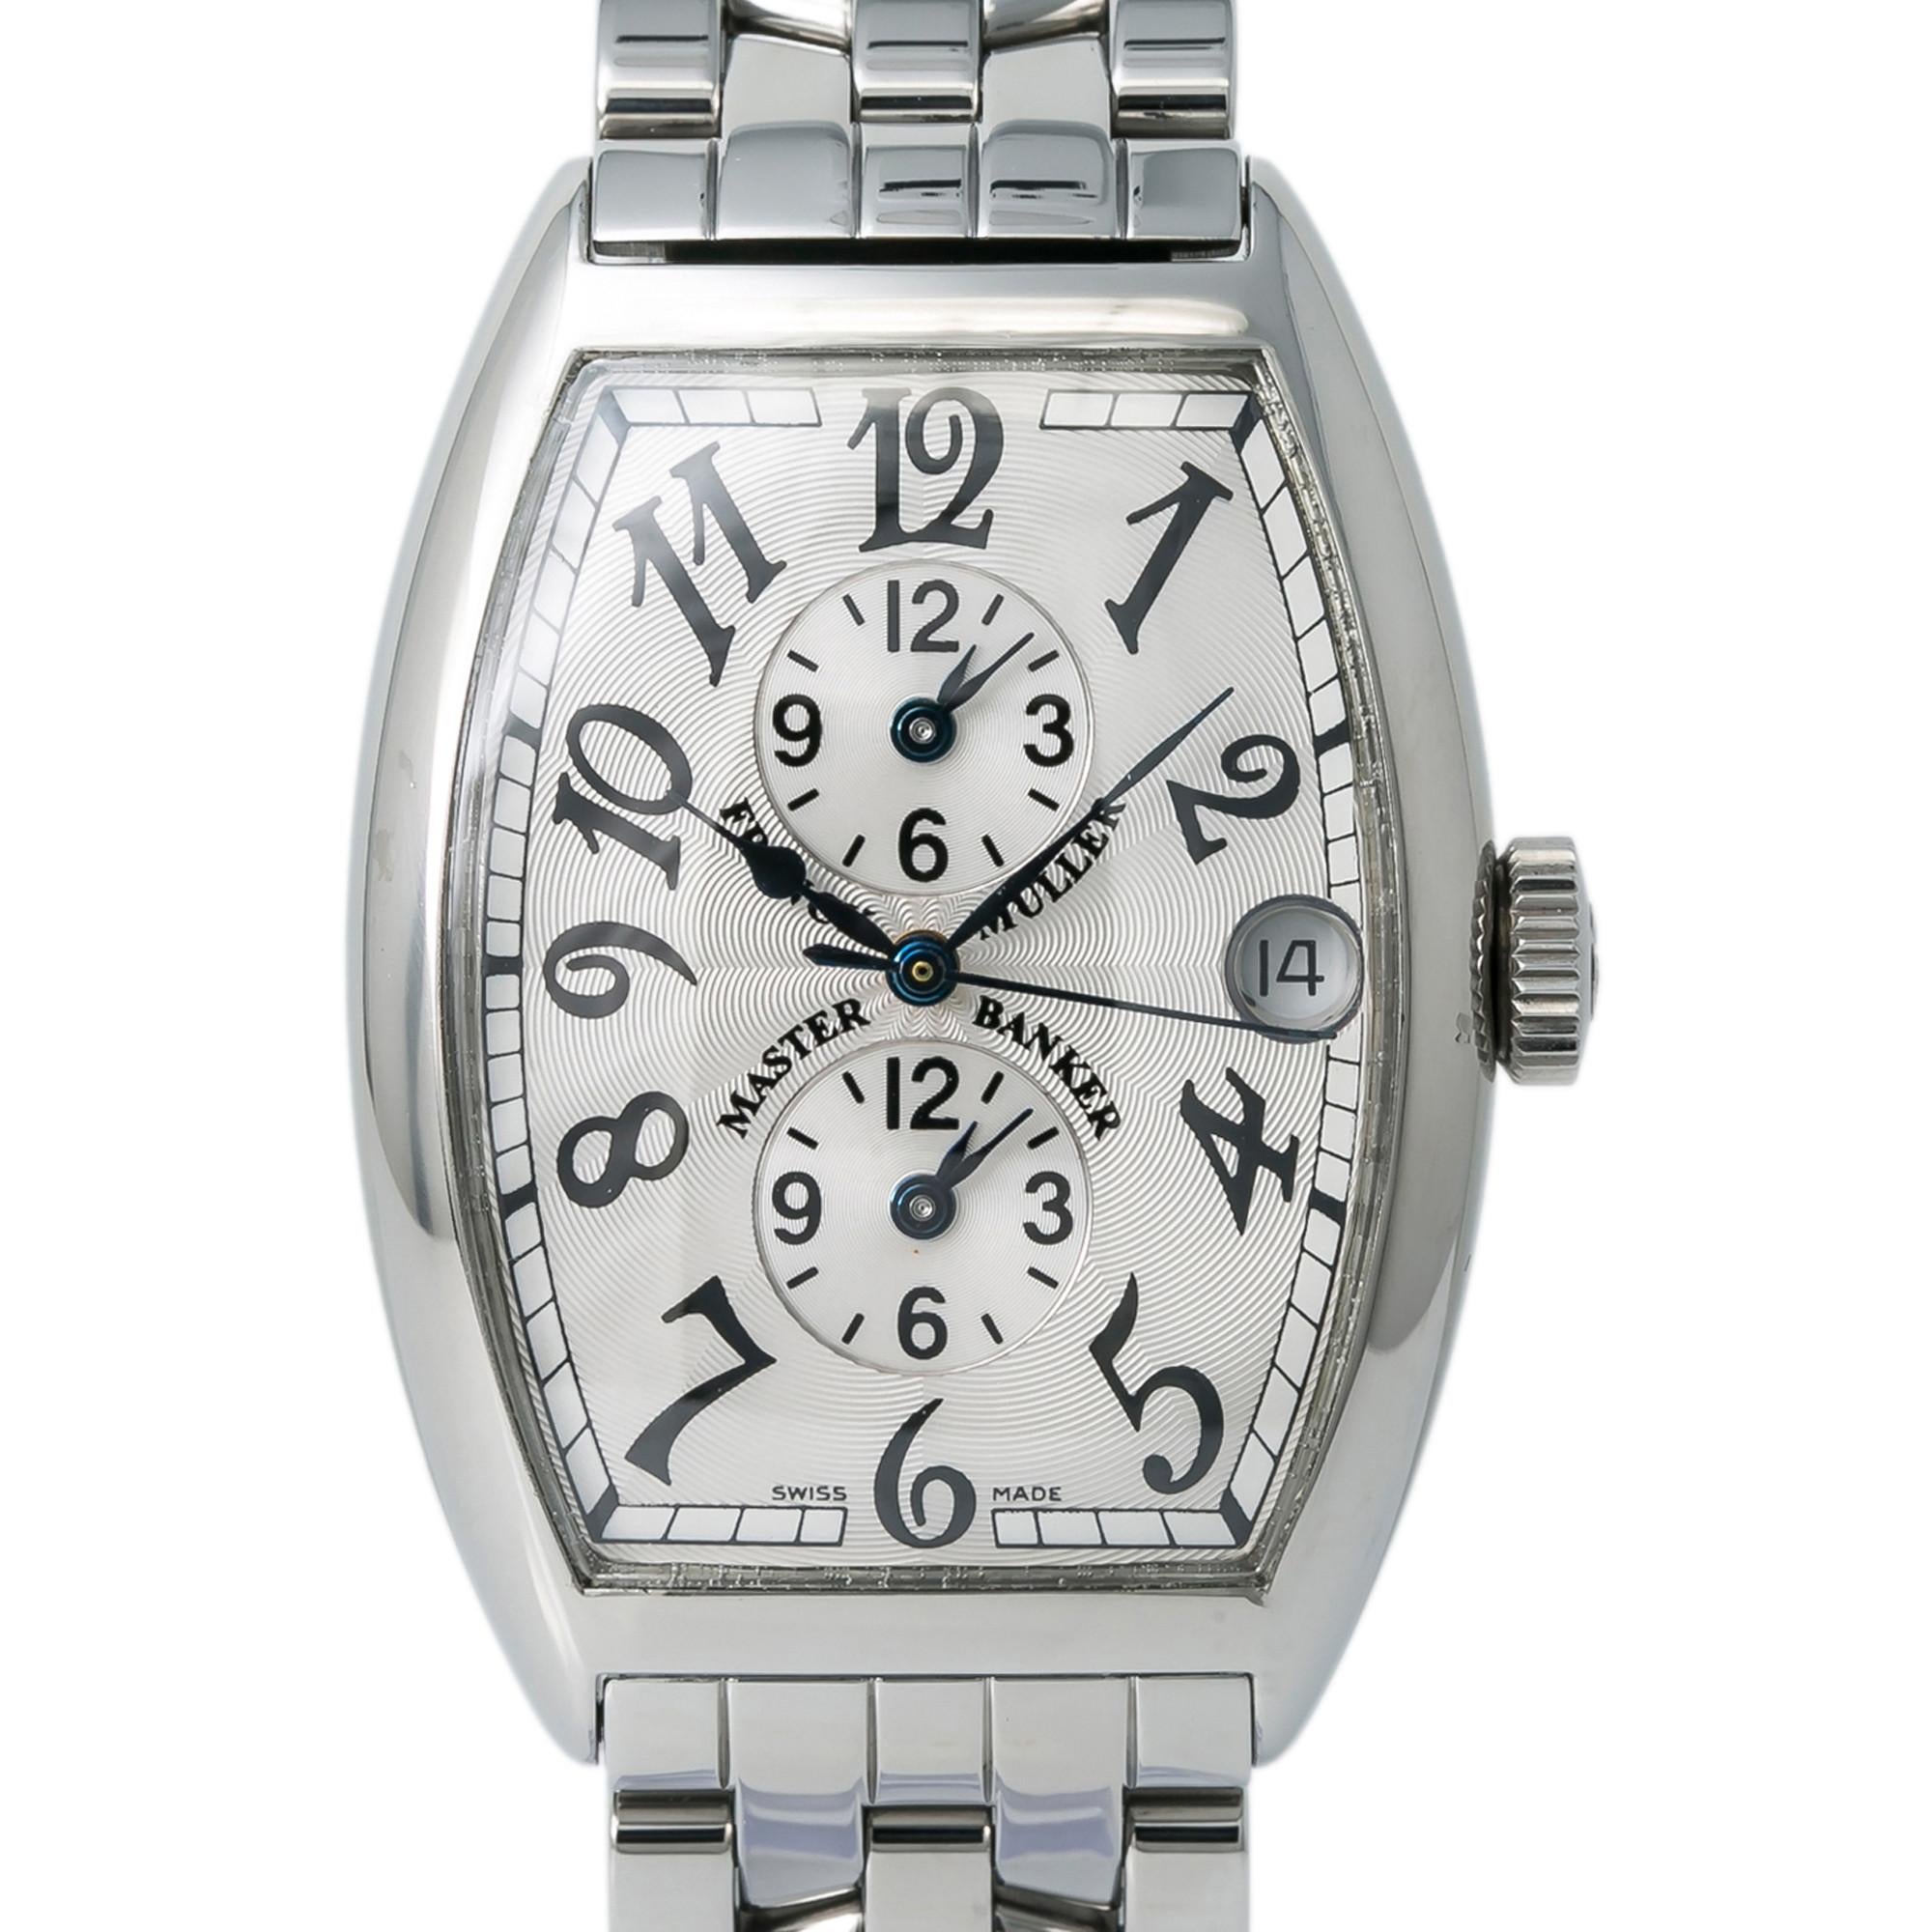 Franck Muller Master Banker 5850 Men's Automatic Watch Stainless Steel For Sale 1